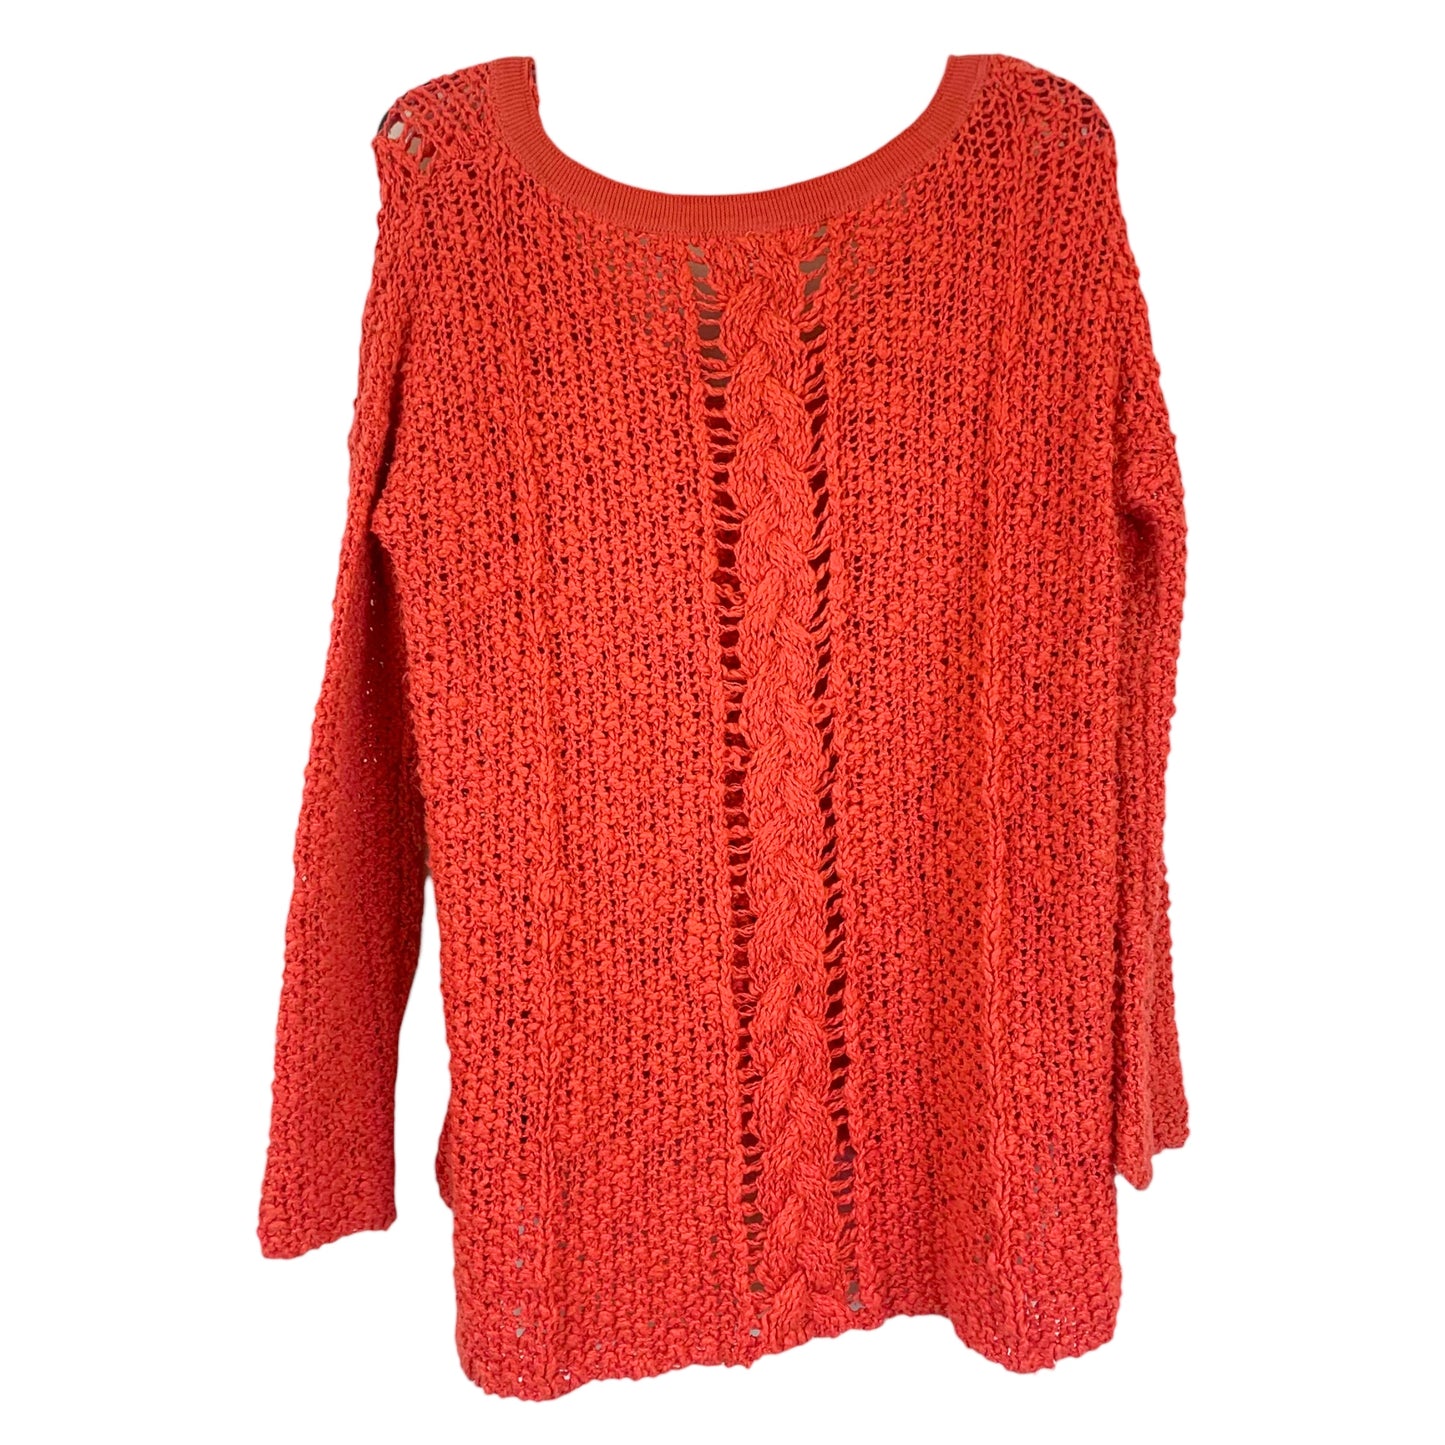 Sweater By Free People Size: S